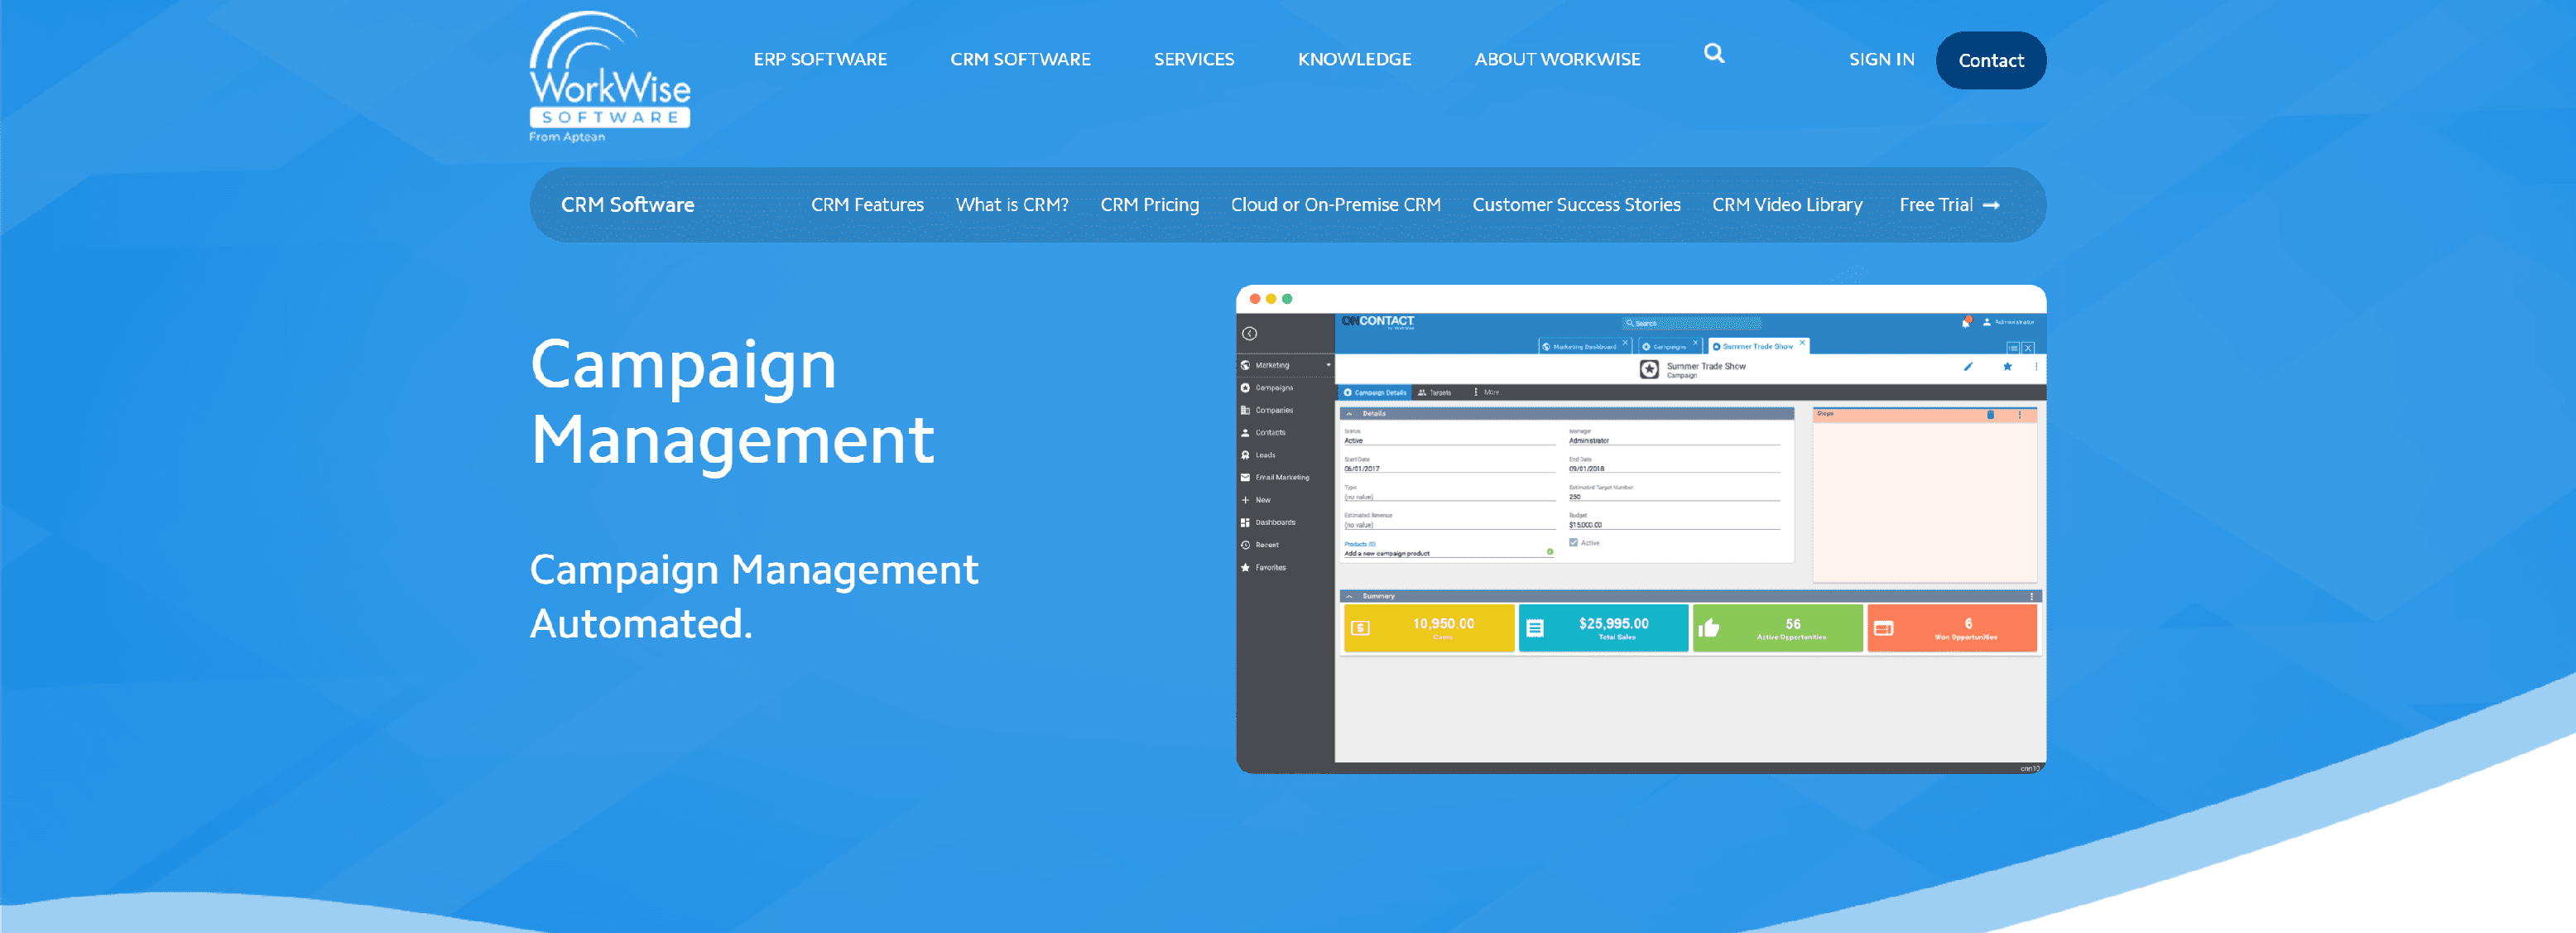 Top 10 Best Campaign Management Software Platforms And Tools For